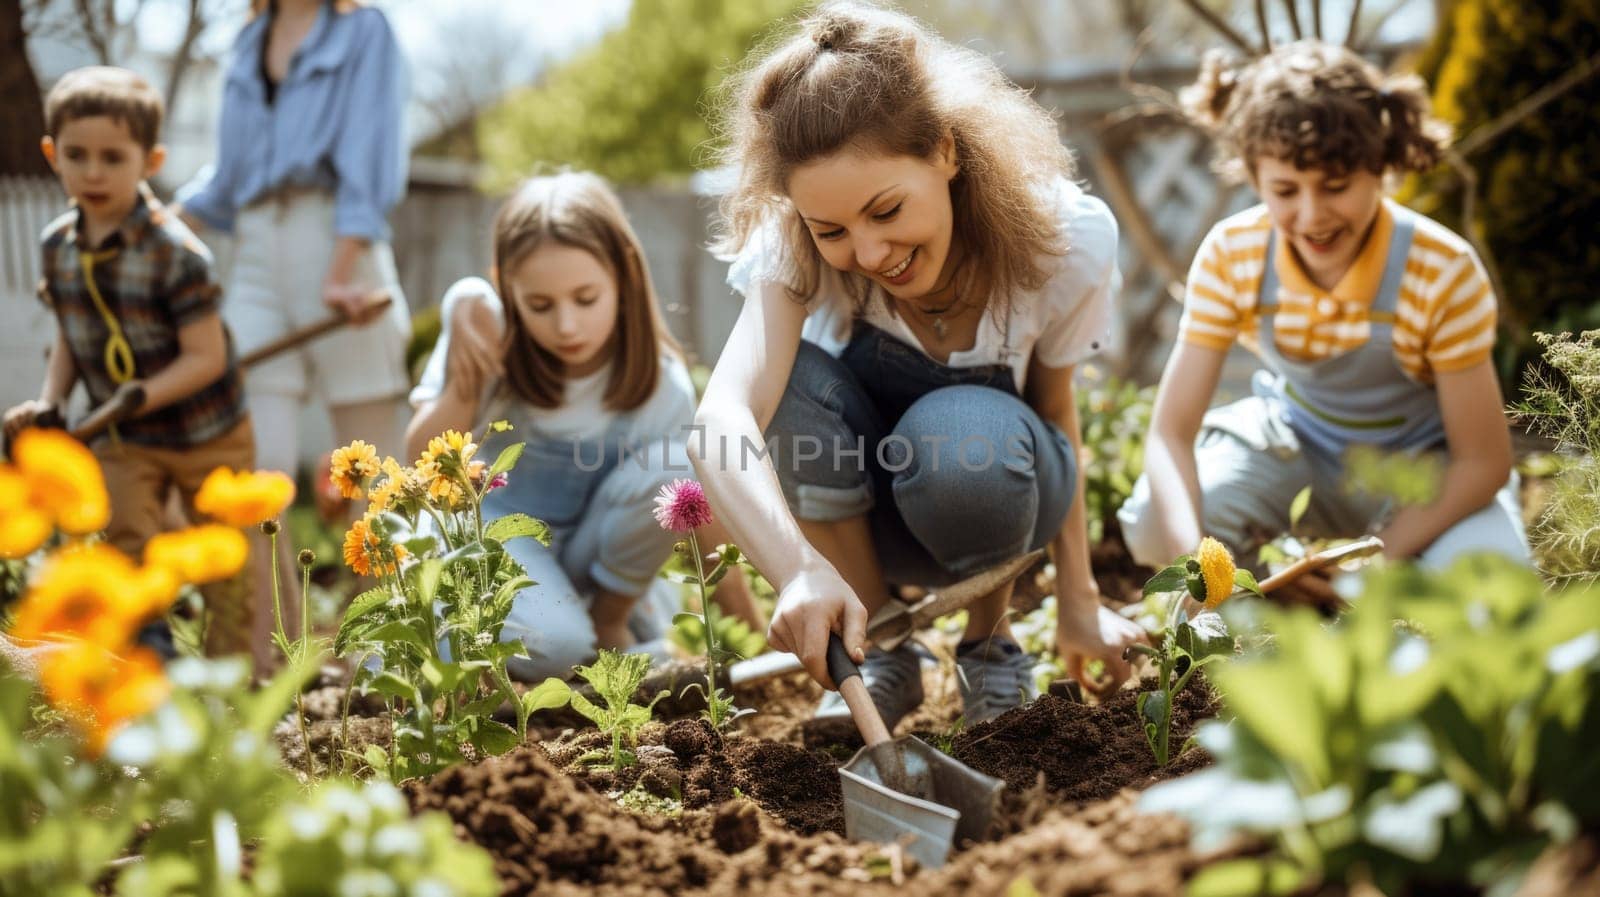 A happy family enjoying leisure time, picking beautiful flowers in a natural landscape surrounded by plants, trees, and grass. AIG41